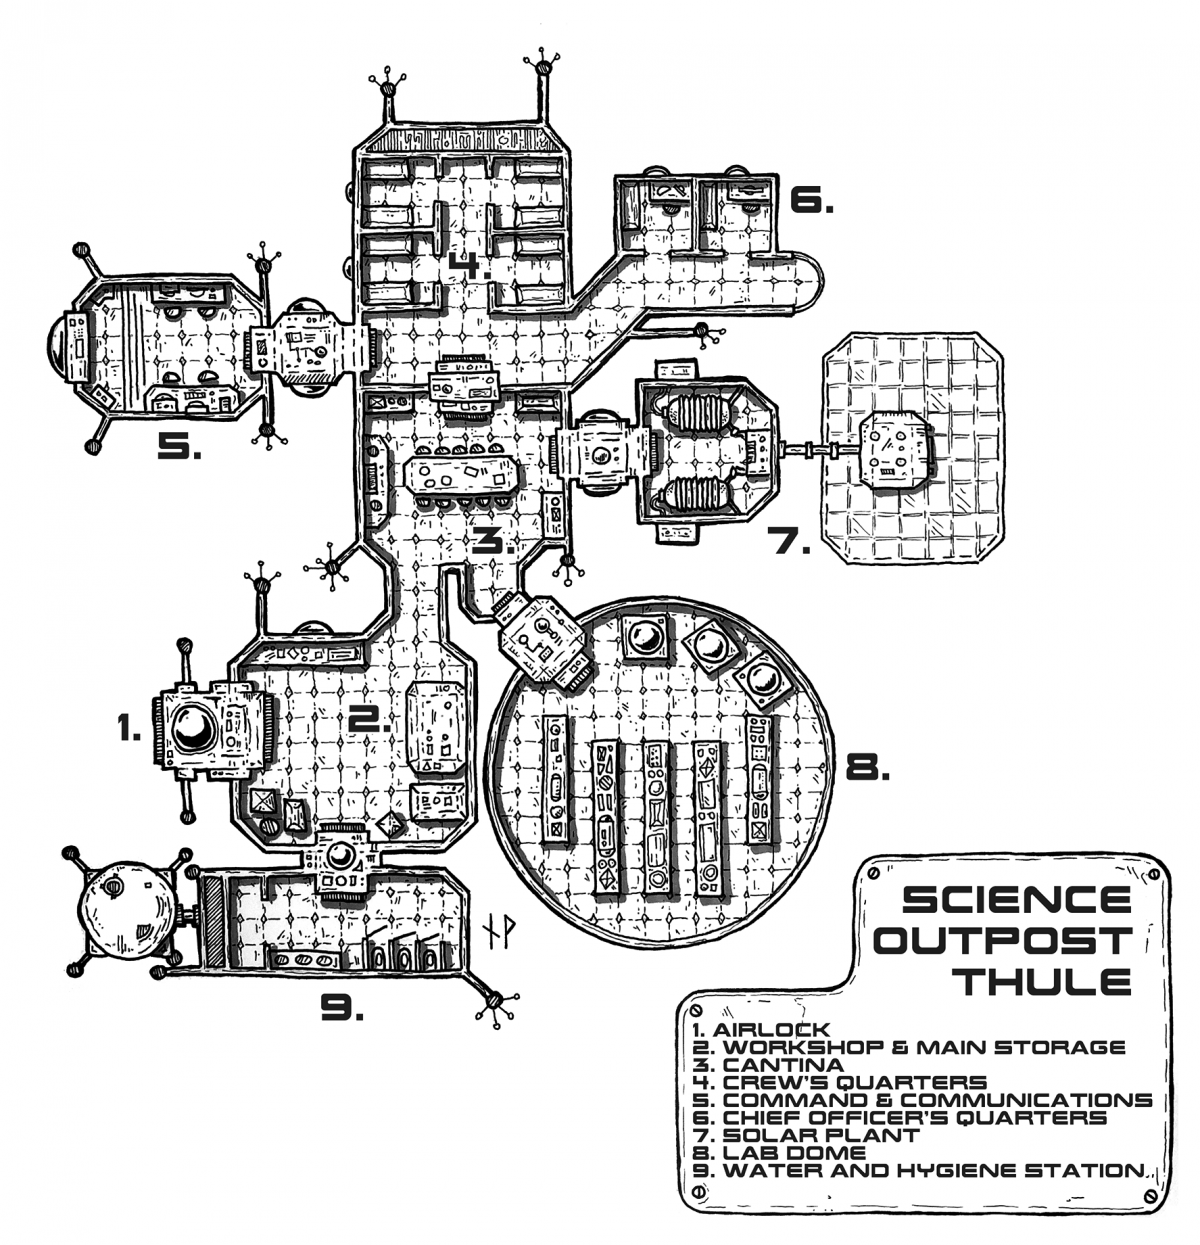 Science Outpost Thule: Sci-Fi RPG map